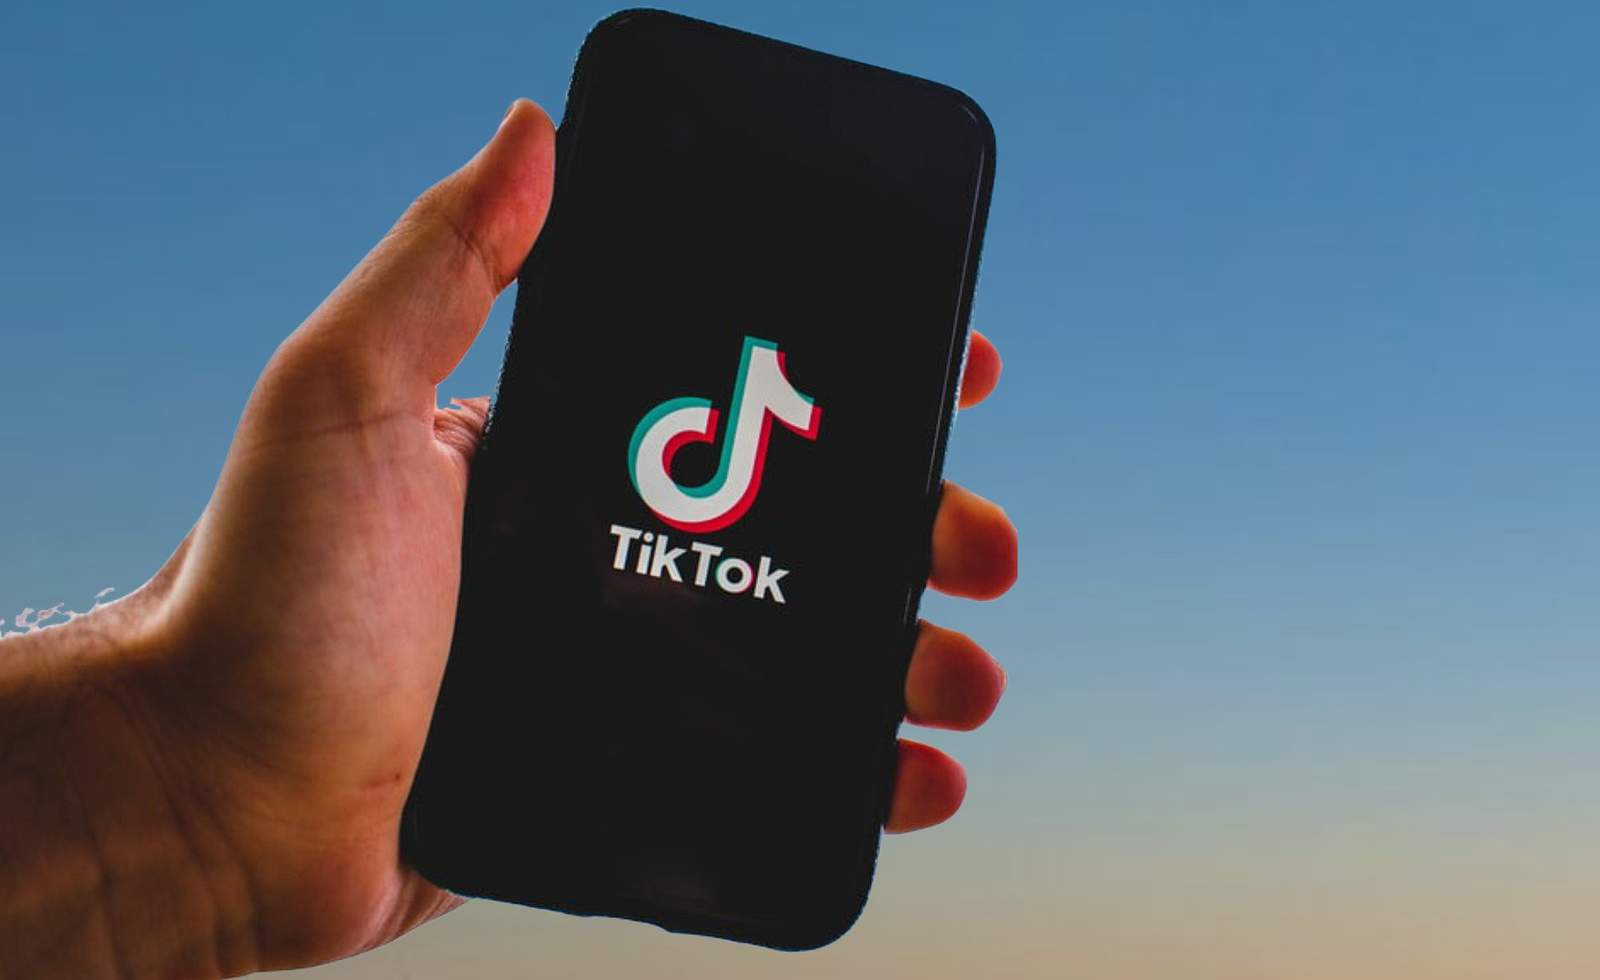 TikTok says it will bring hundreds of new jobs to Austin despite President Trump’s attempt to ban the app